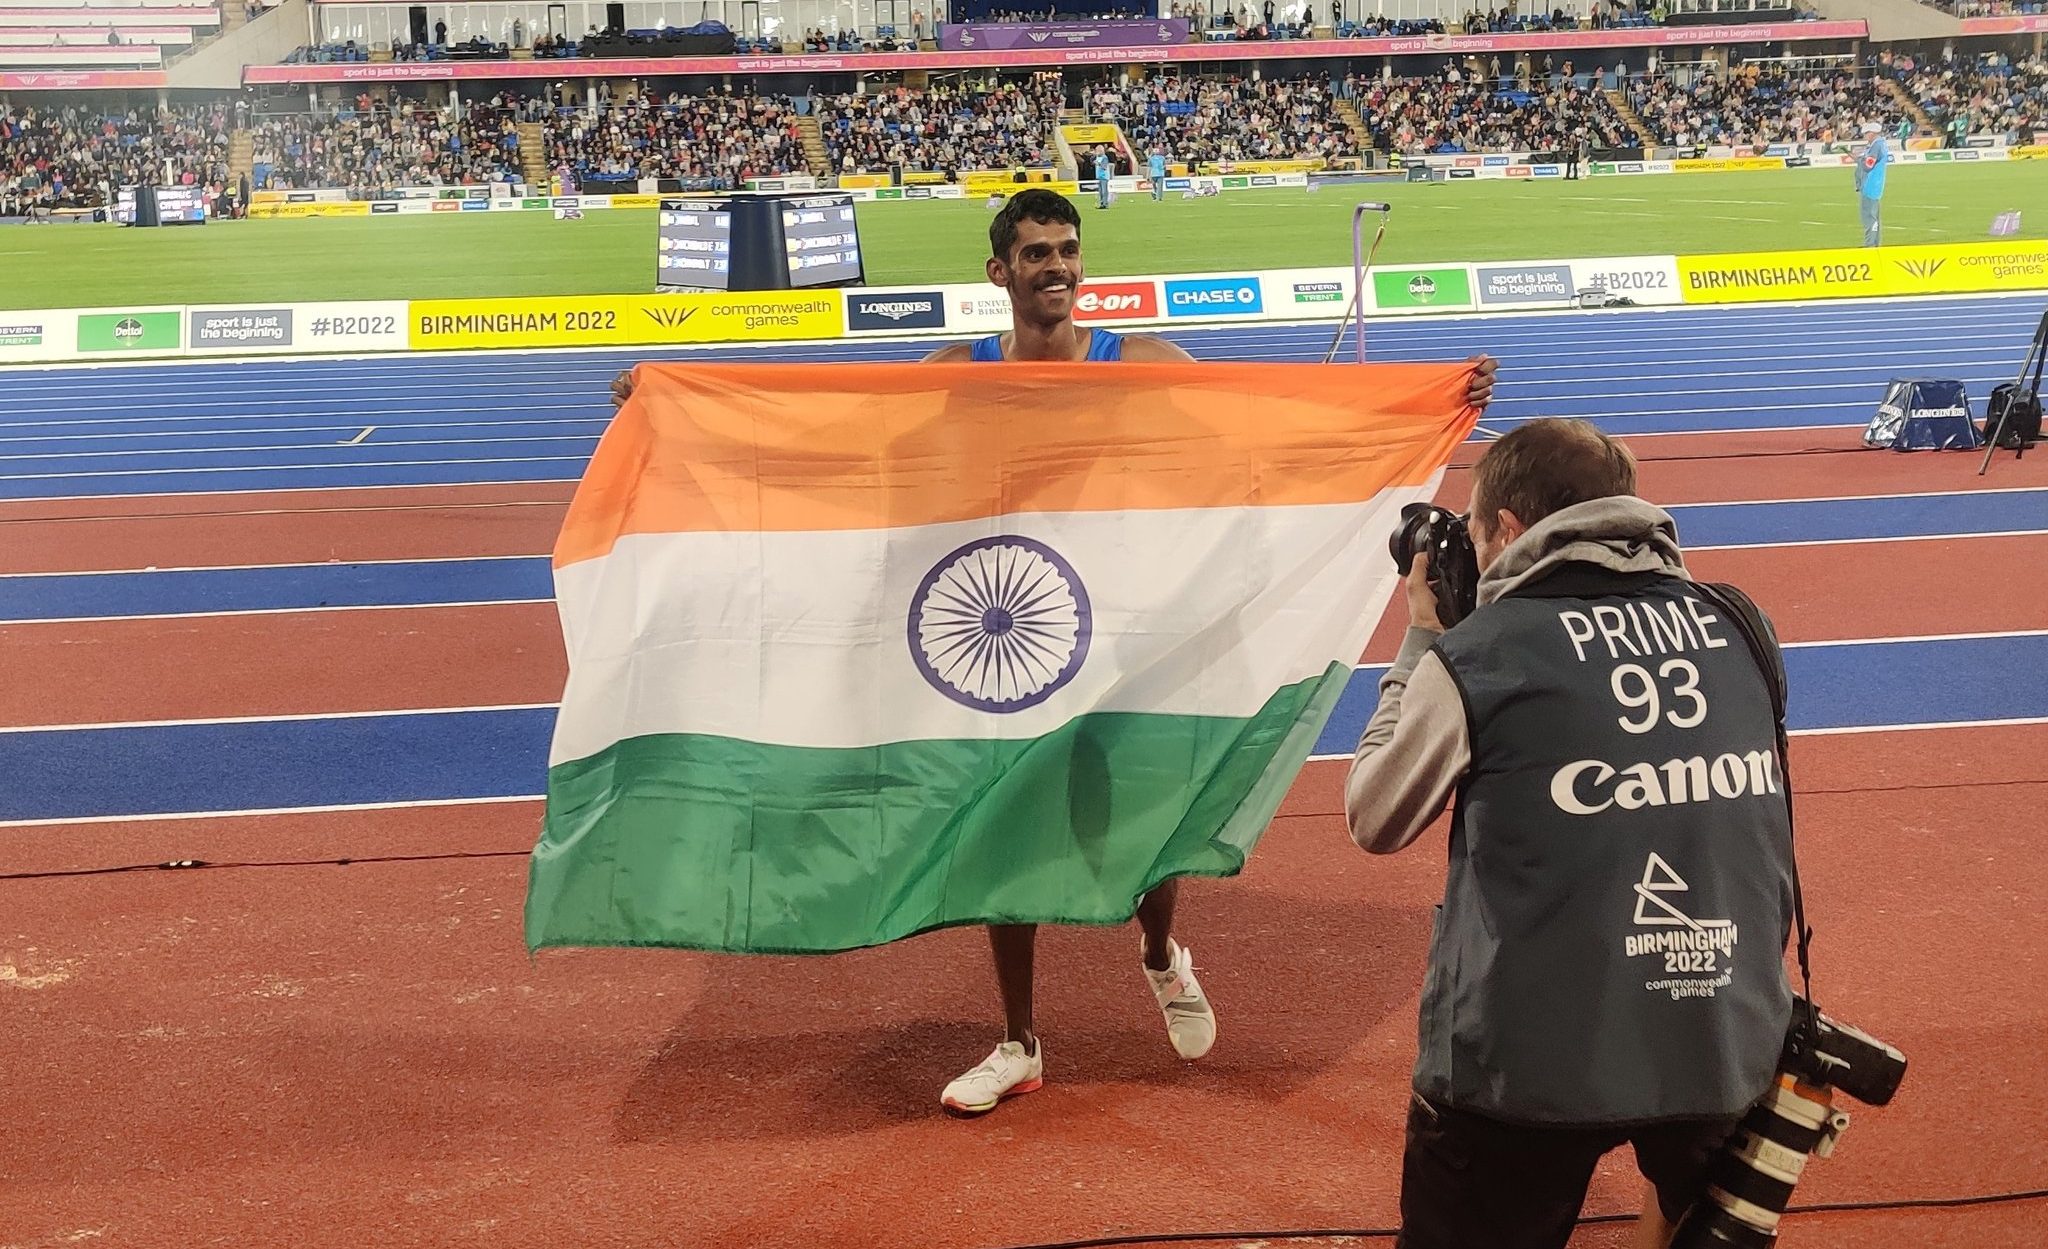 Kerala's Murali Sreeshankar on Friday, 5 August, became the first Indian to win a silver medal at the 2022 Birmingham Commonwealth Games improving upon fellow Keralite Suresh Babu achievement, who lifted a bronze at the 1978 Edmonton edition. (Twitter / SAI Media)